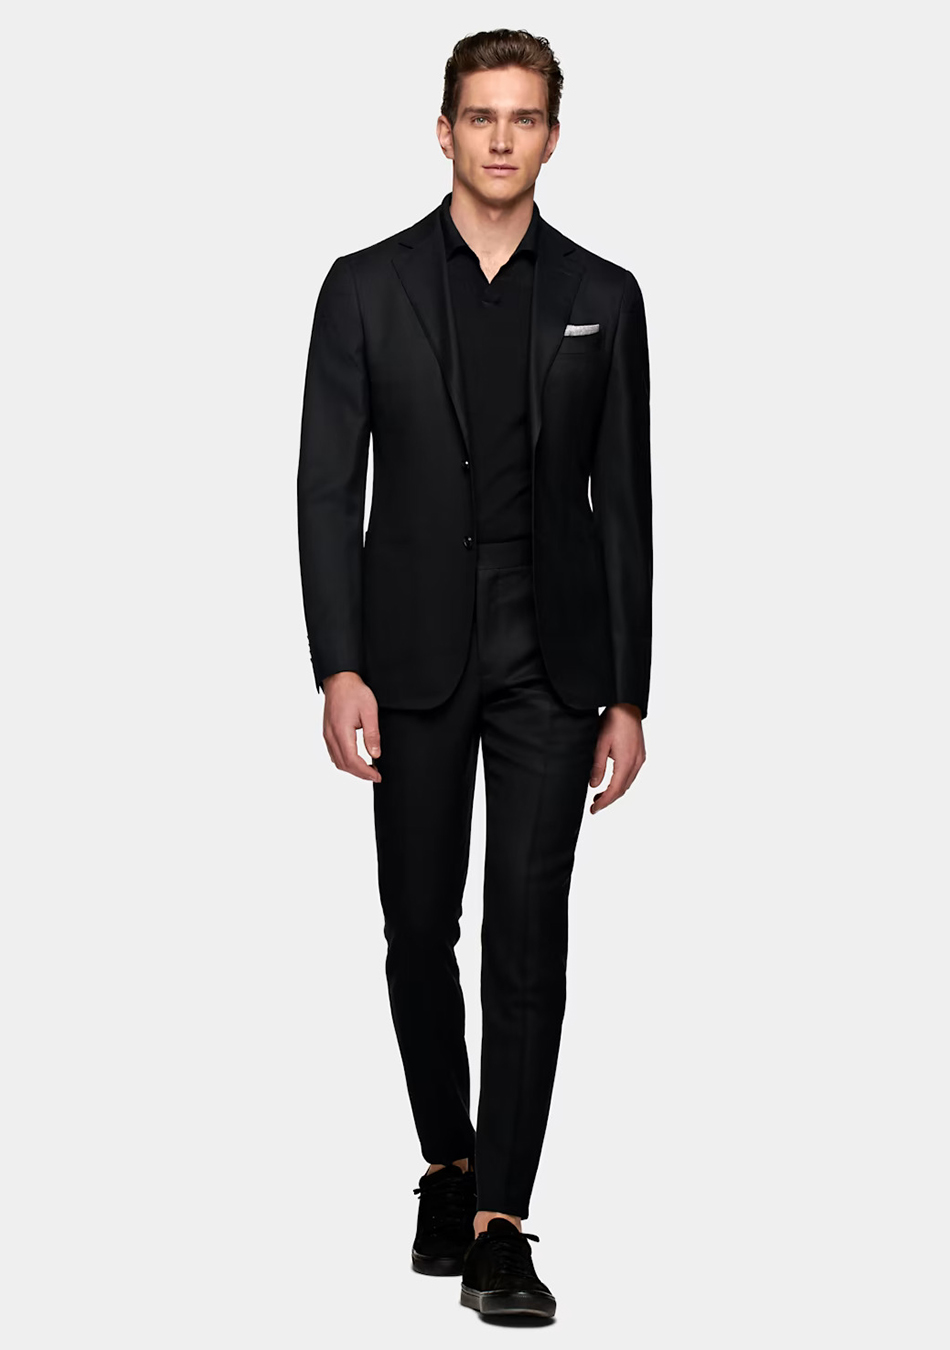 Black suit, black polo shirt, and black sneakers